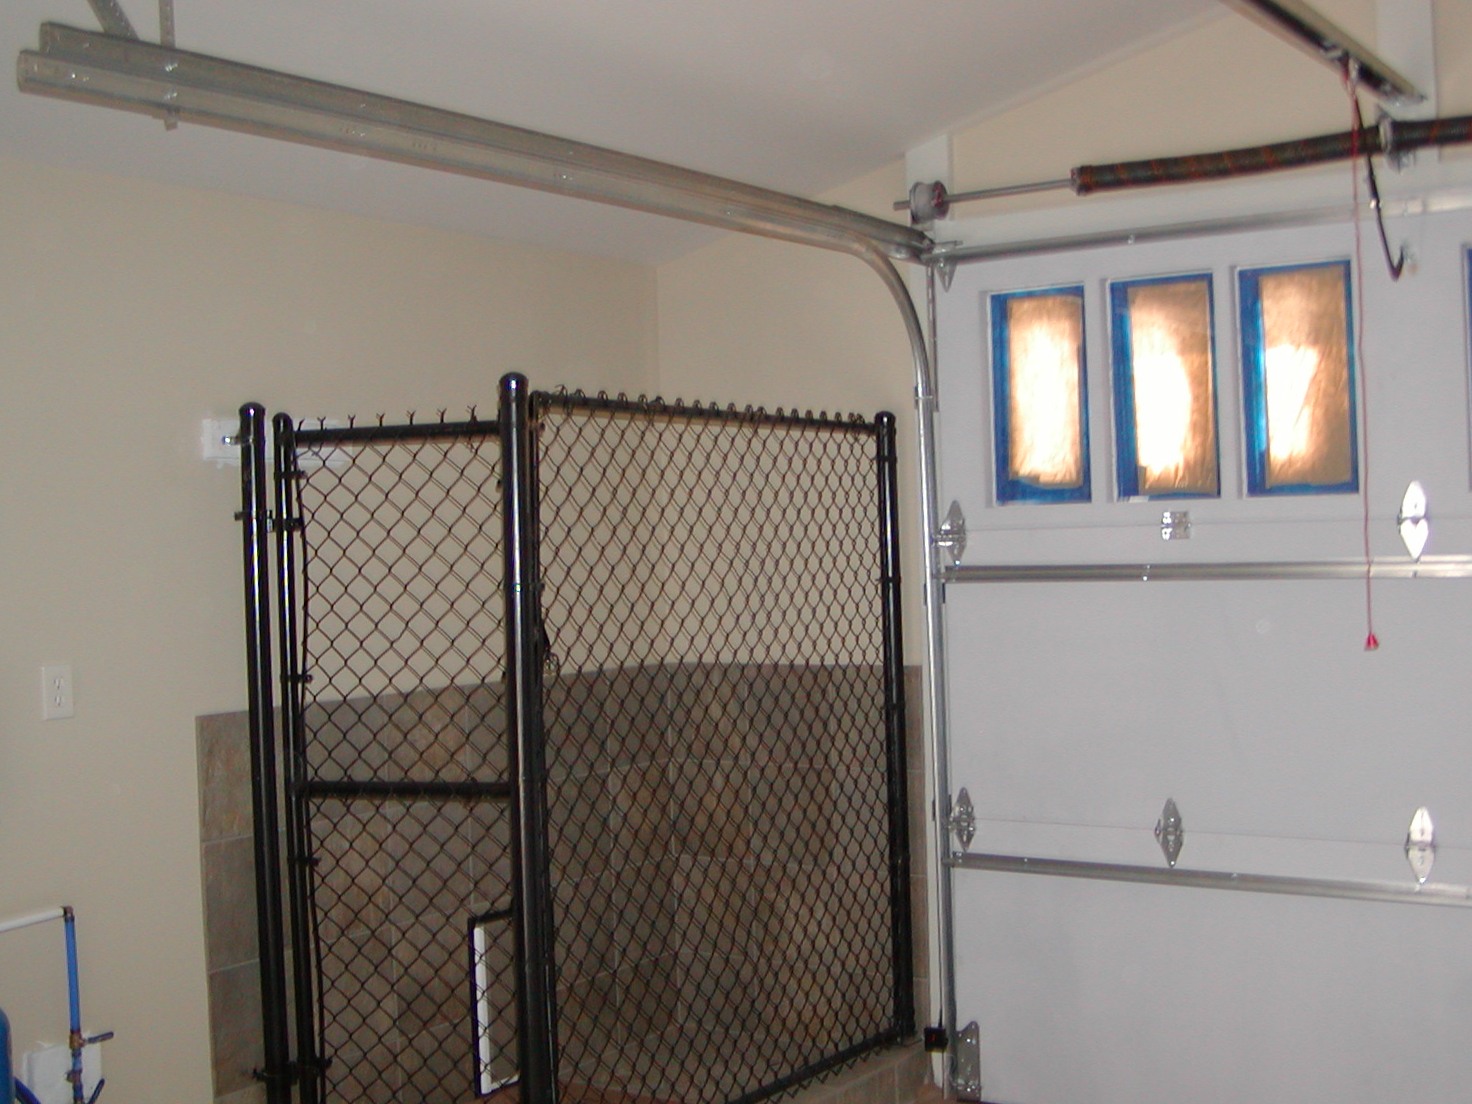 Dog kennel doors 20 adventiges for your pets Interior & Exterior Ideas